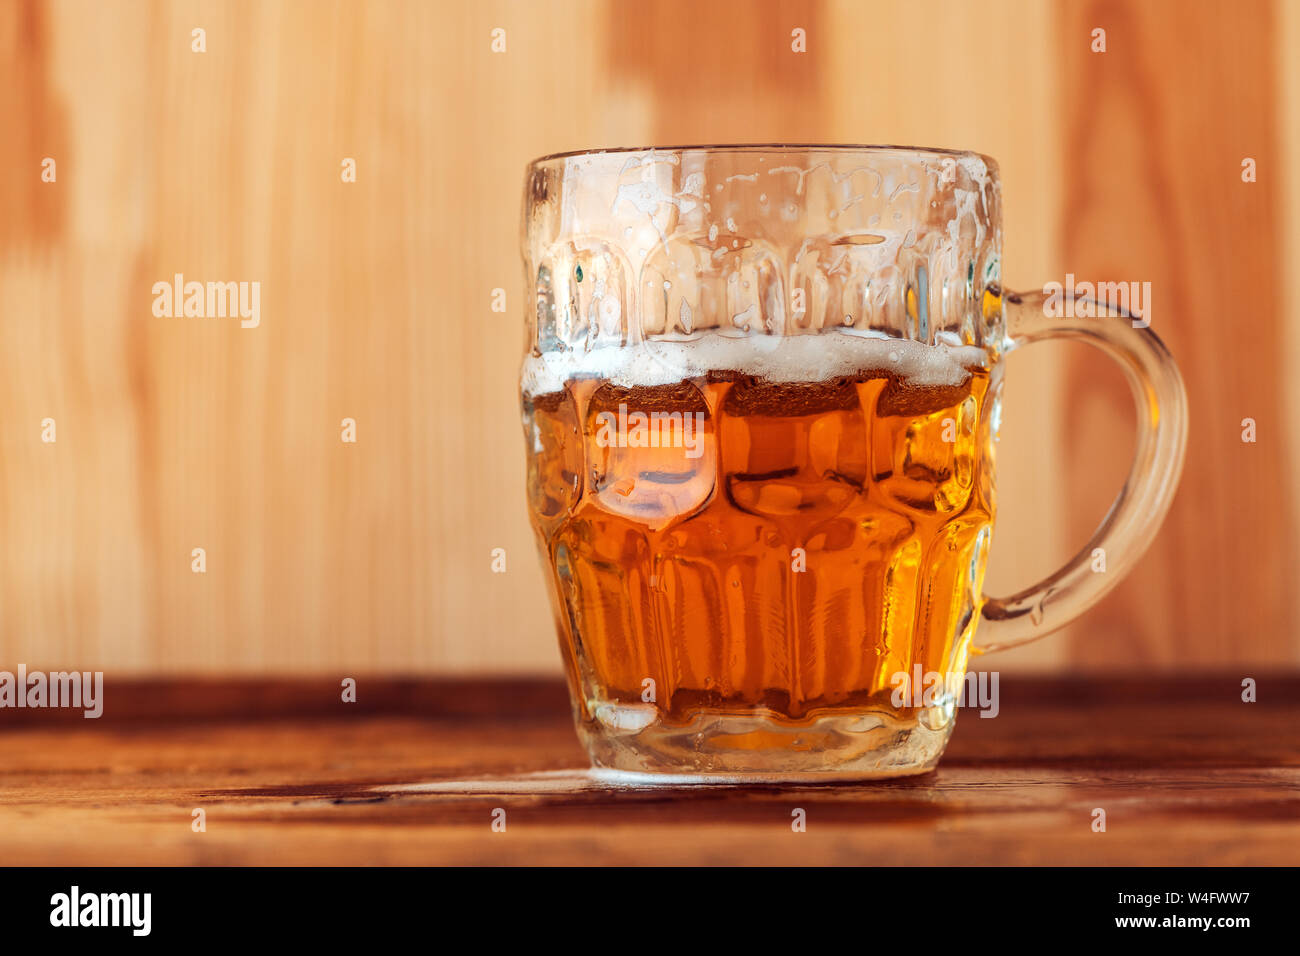 Beer jug on bar counter, single drinking glass with fresh alcohol beverage Stock Photo